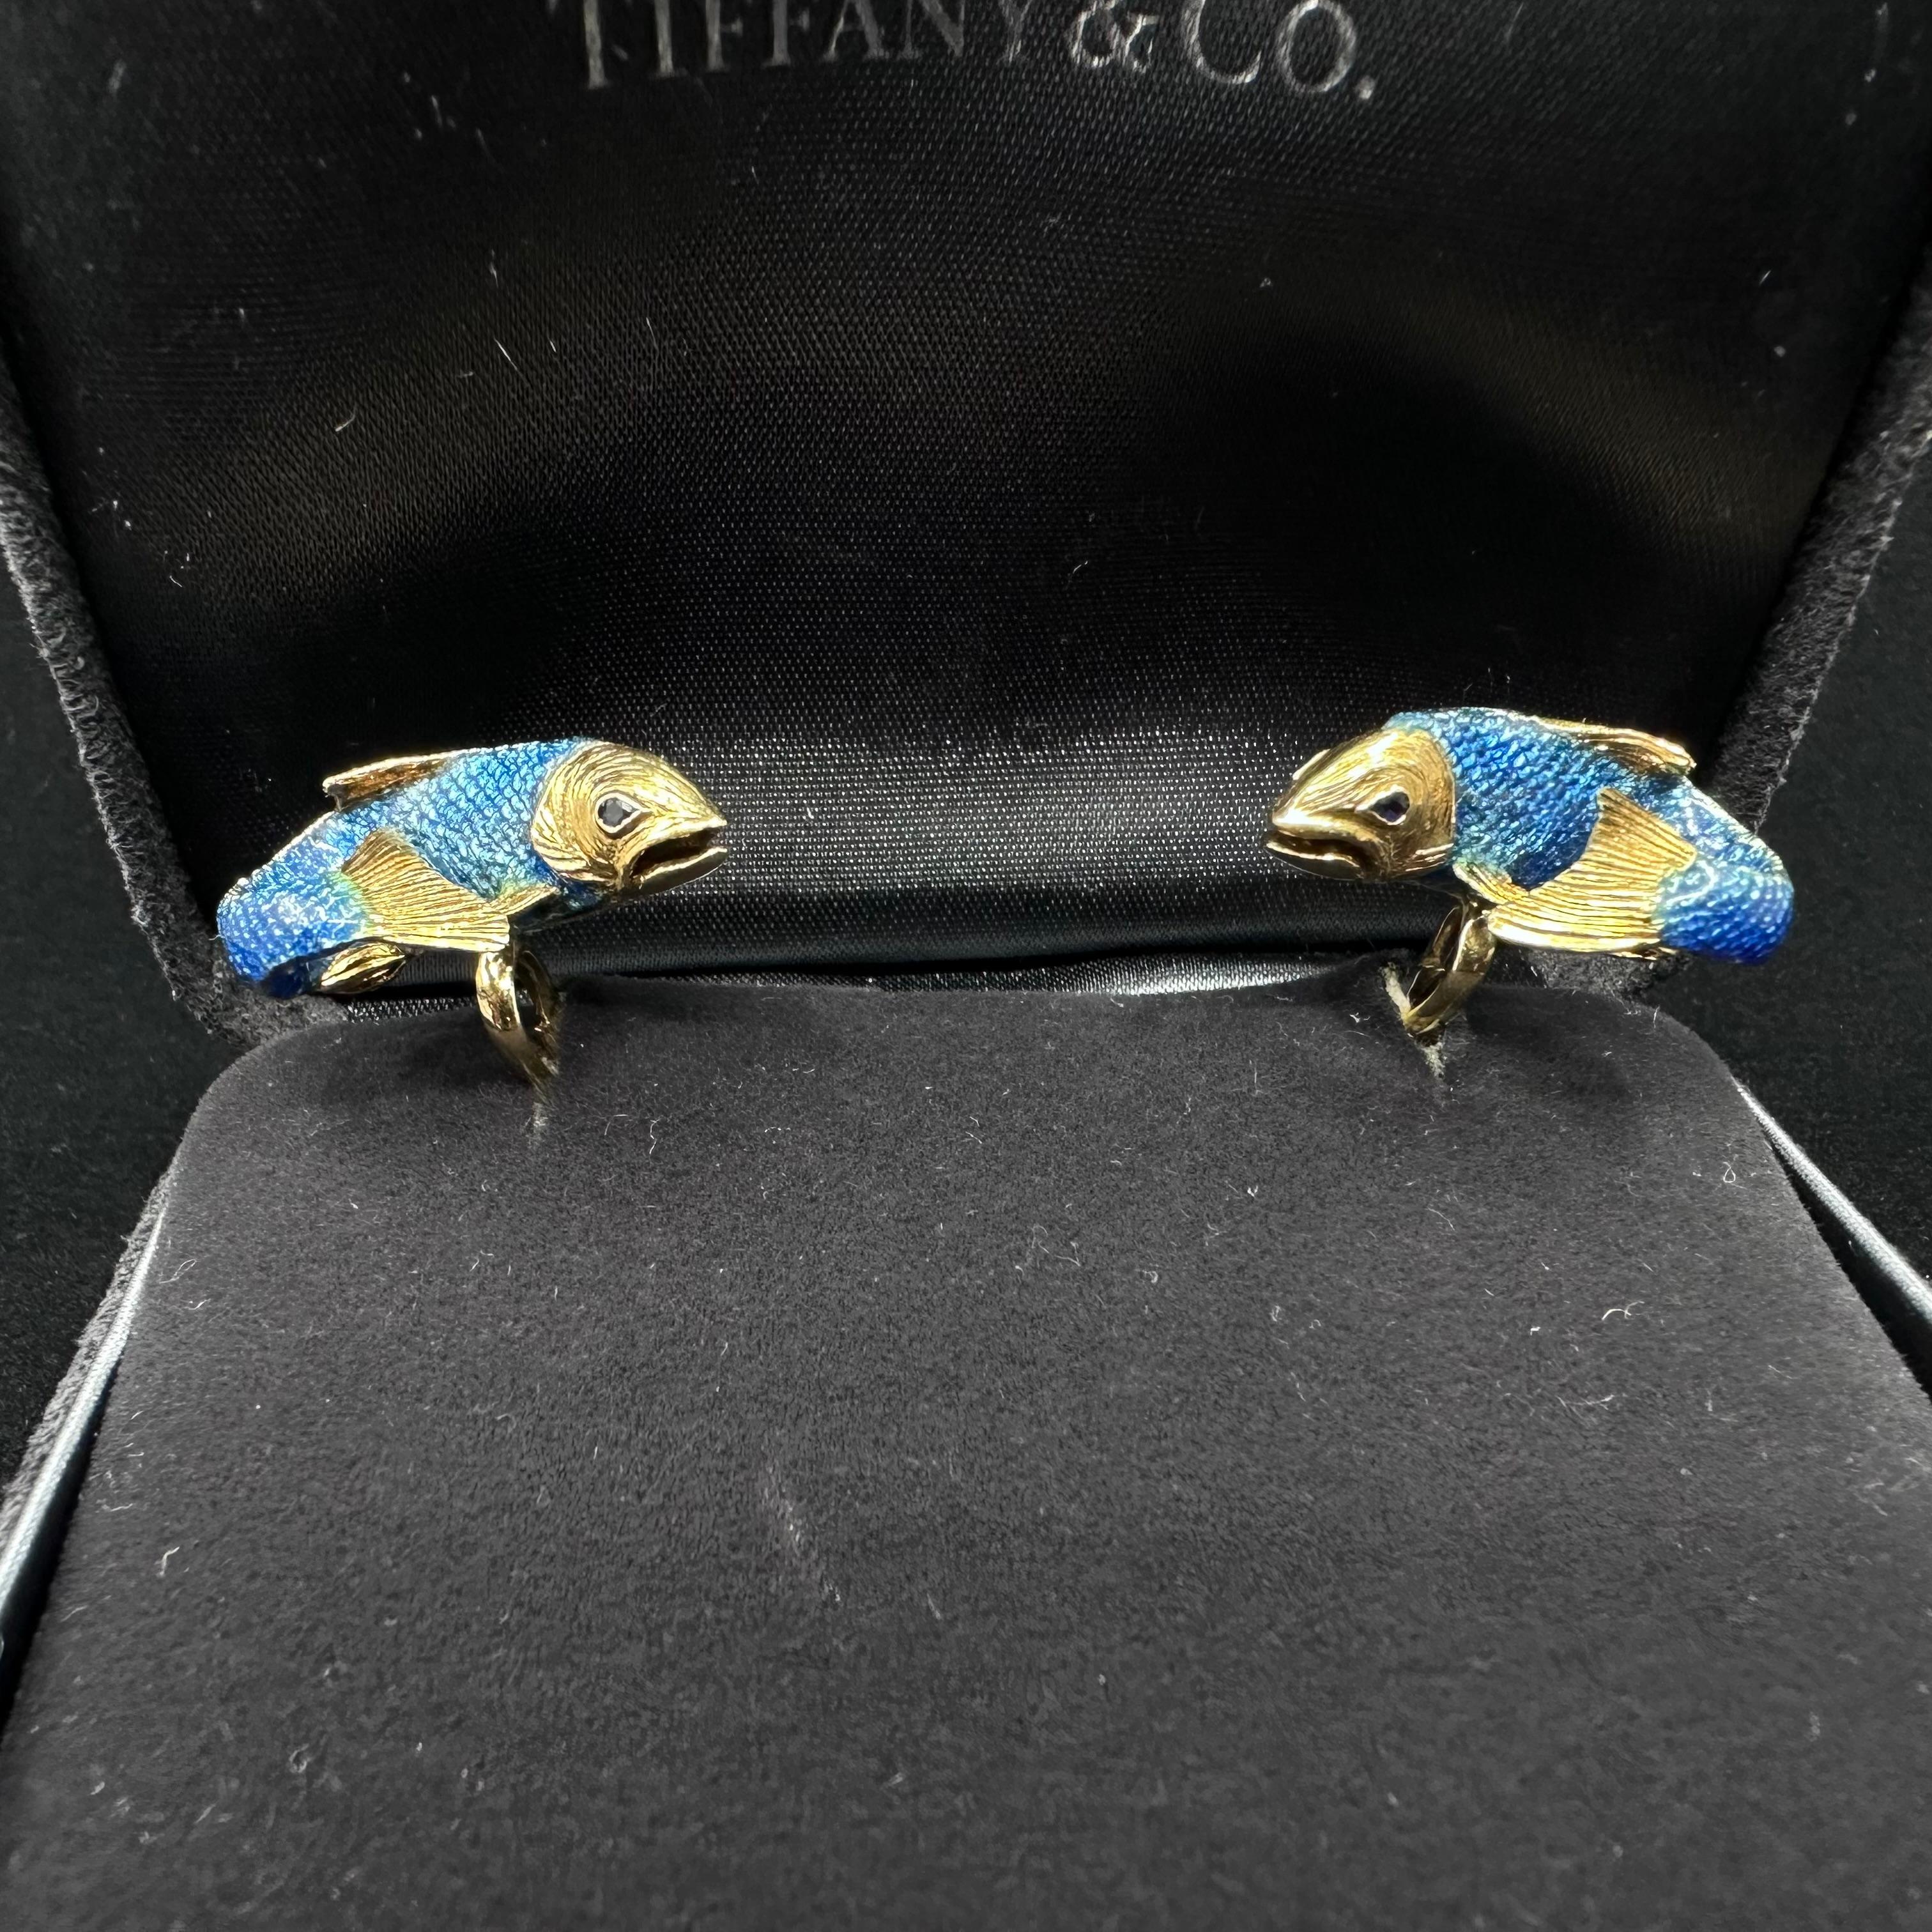 Tiffany & Co Enameled Trout Cufflinks 
Hallmarked Tiffany 750 C Germany
Weight 22 g
Length .90 inch 
width .50 inch 
Rare Tiffany Cufflinks Beautiful blue enameled trout motif 18k yellow gold.  The findings are designed as a fishhook with faceted